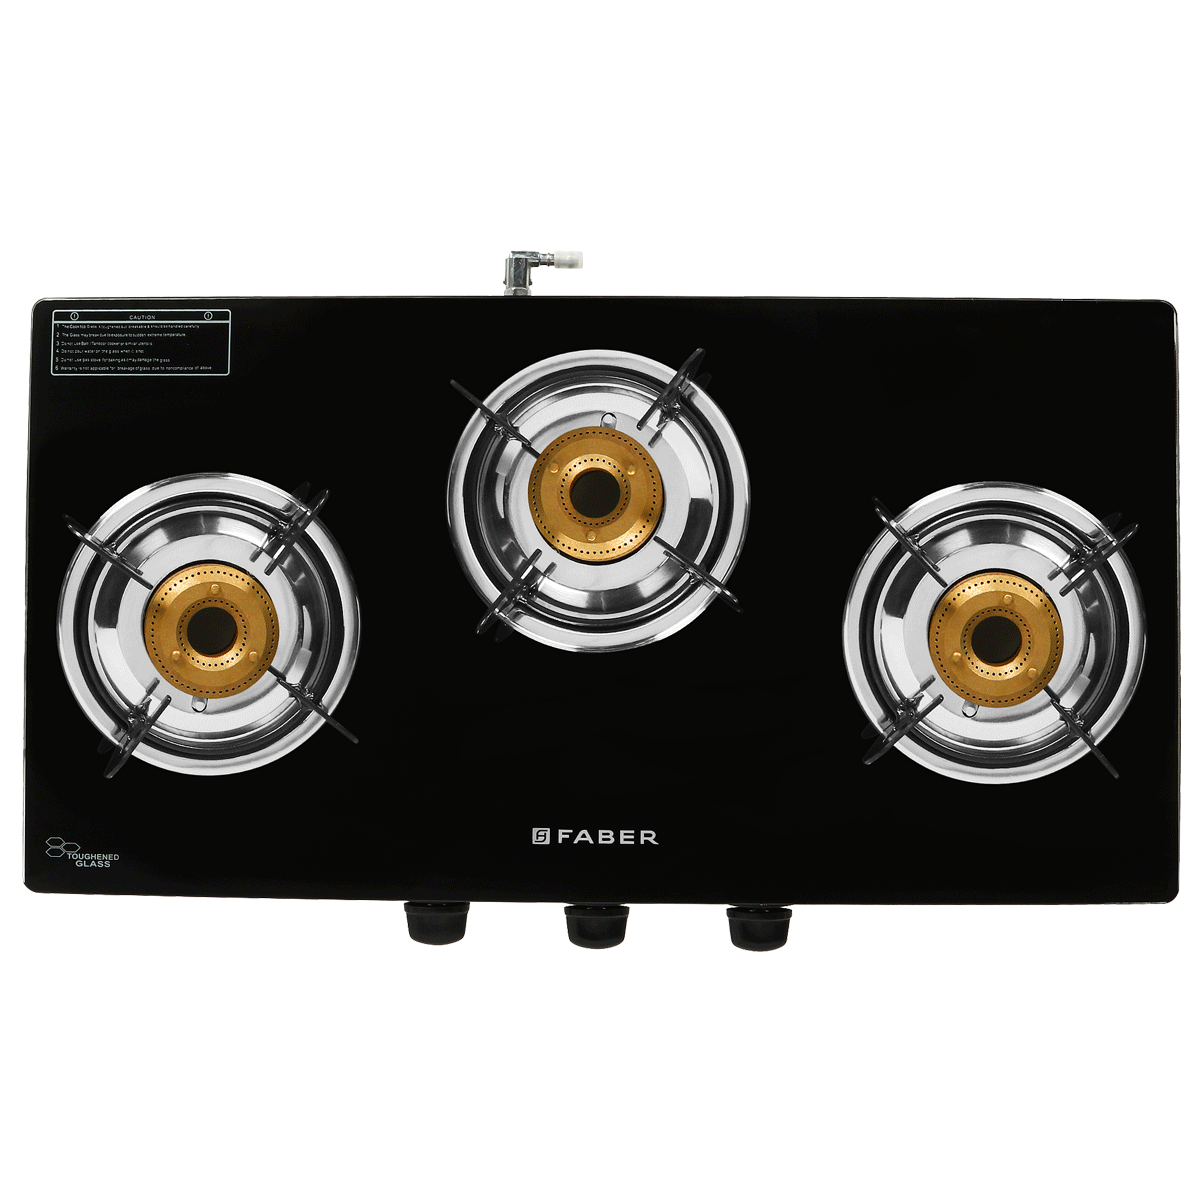 Faber Power 3BB 3 Burner Toughened Glass Gas Stove (Powder Coating Round Pan Support, 106.0629.732, Black)_1